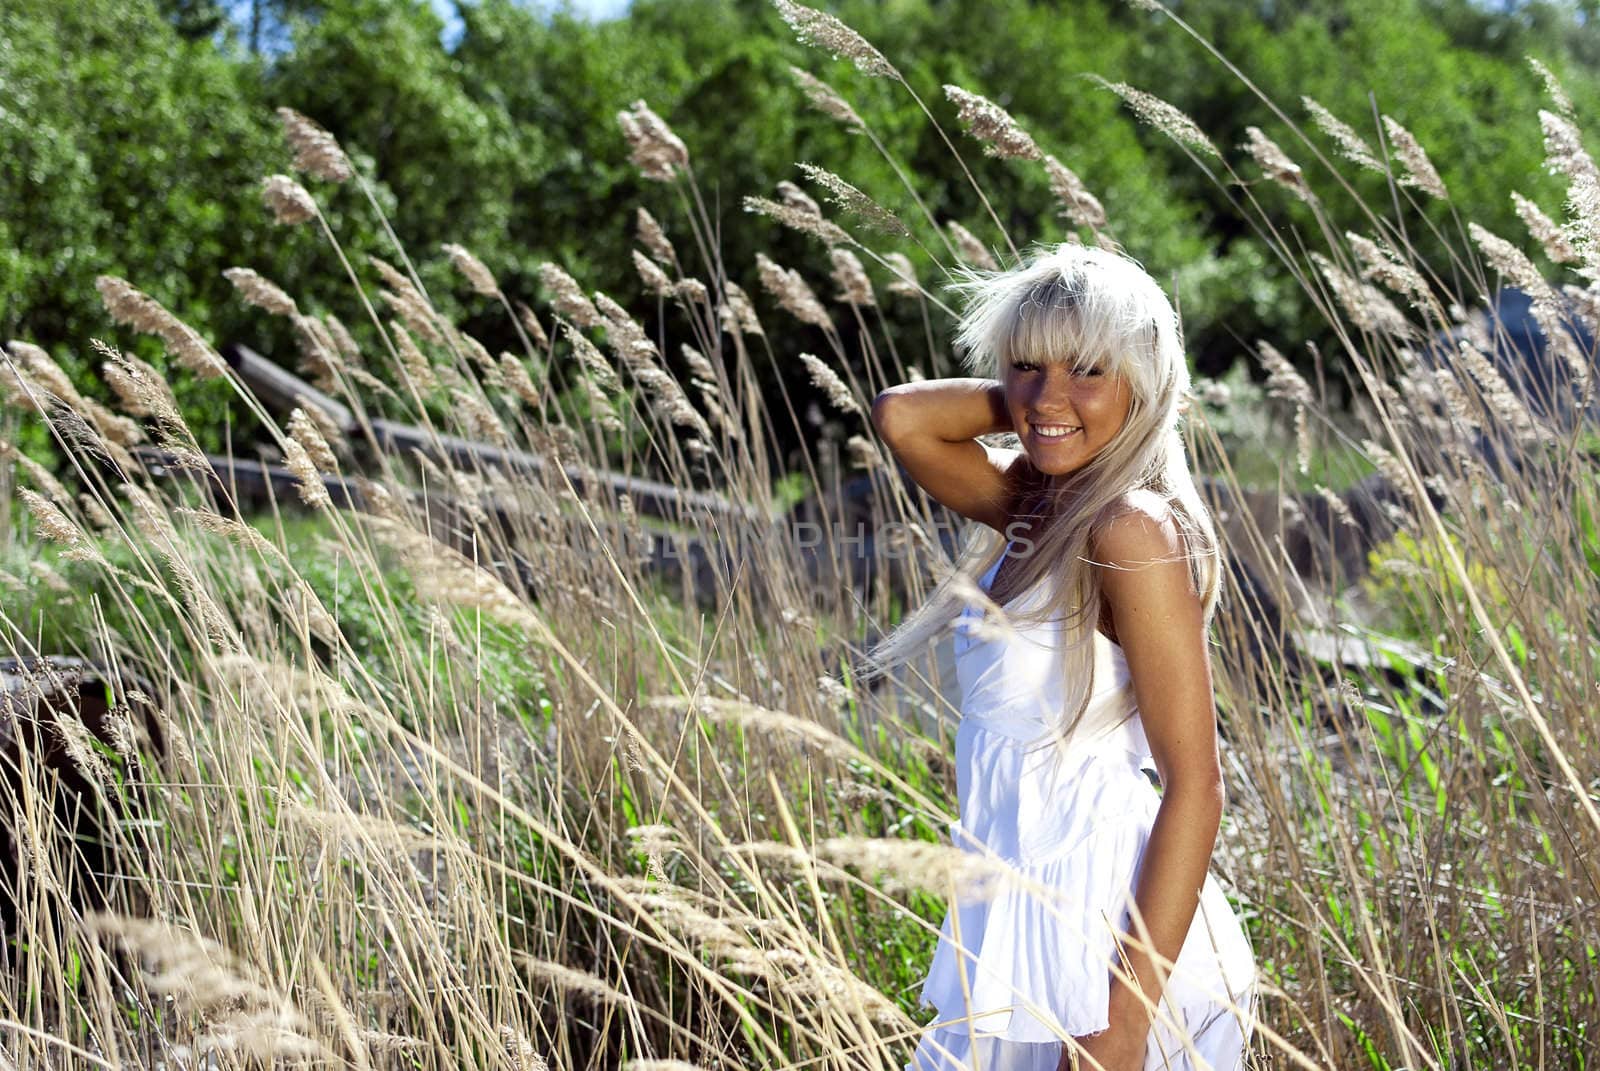 girl in white dress are standing in dry grass at summer daylight